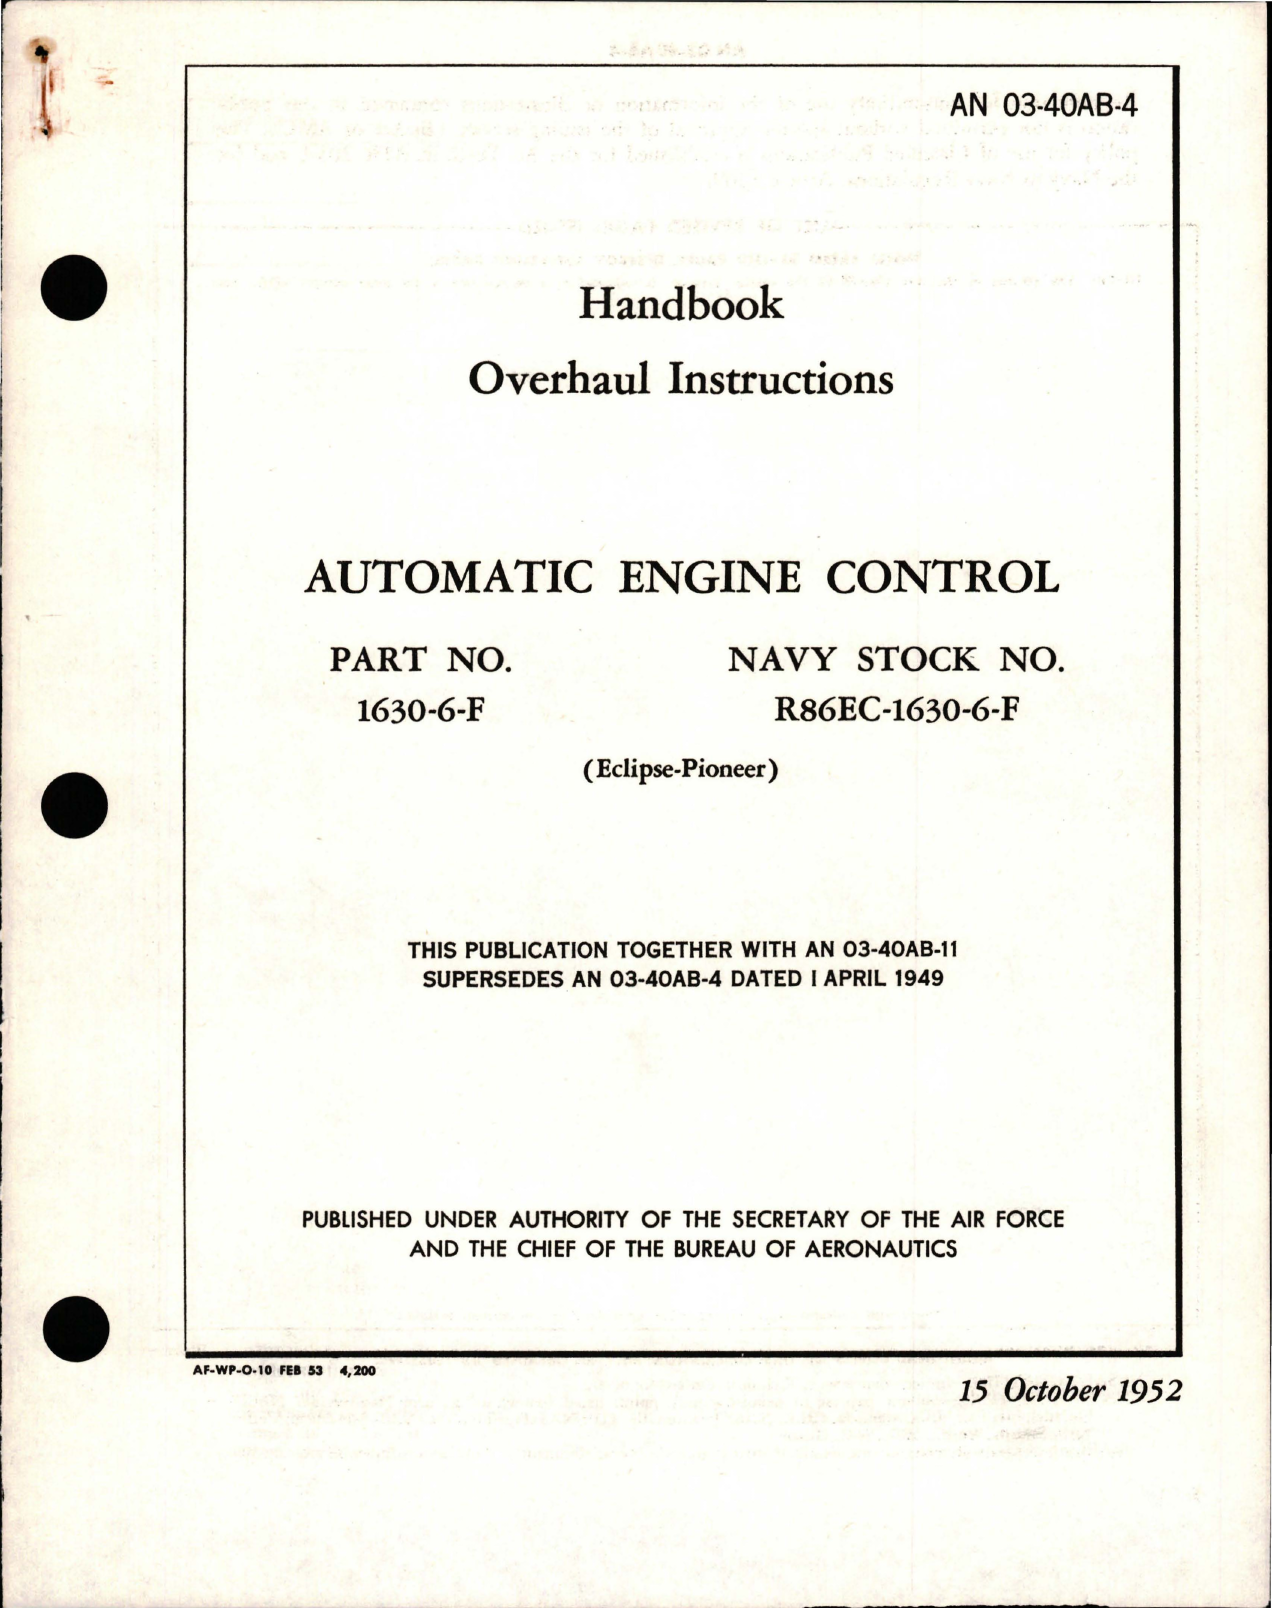 Sample page 1 from AirCorps Library document: Overhaul Instructions for Automatic Engine Control - Part 1630-6-F